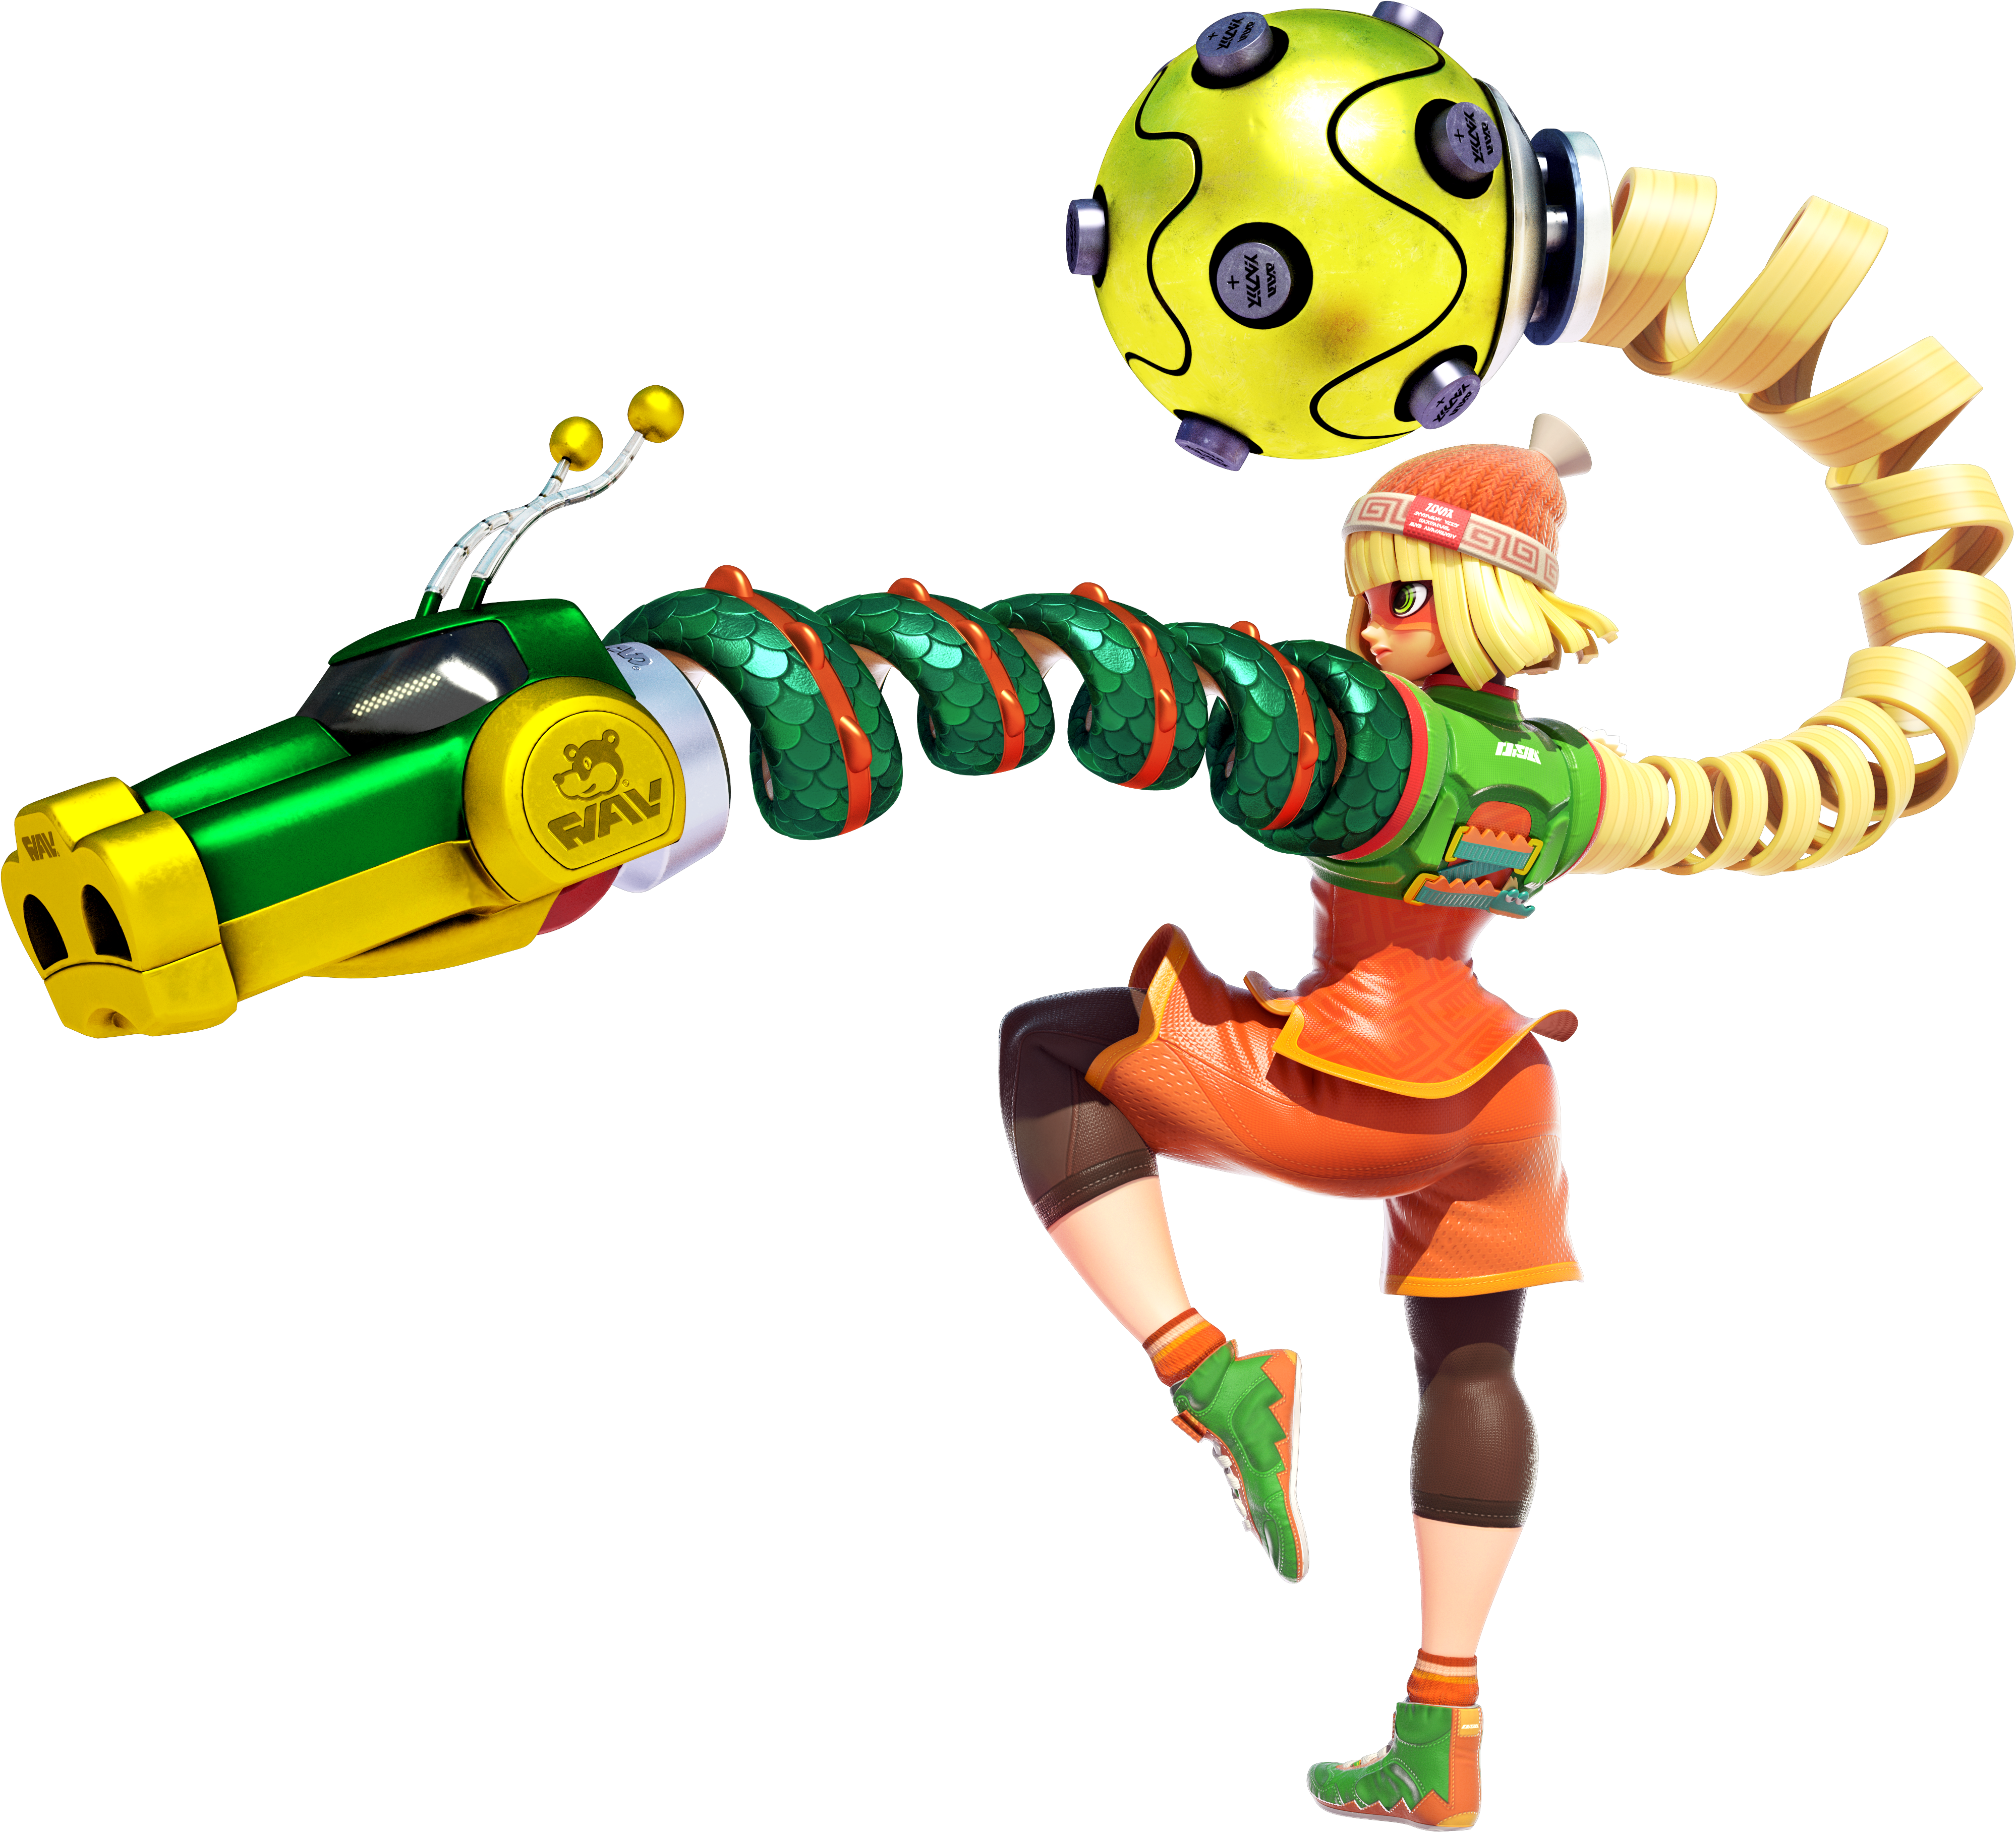 View All Images - Arms Characters Nintendo Switch (4096x4096)